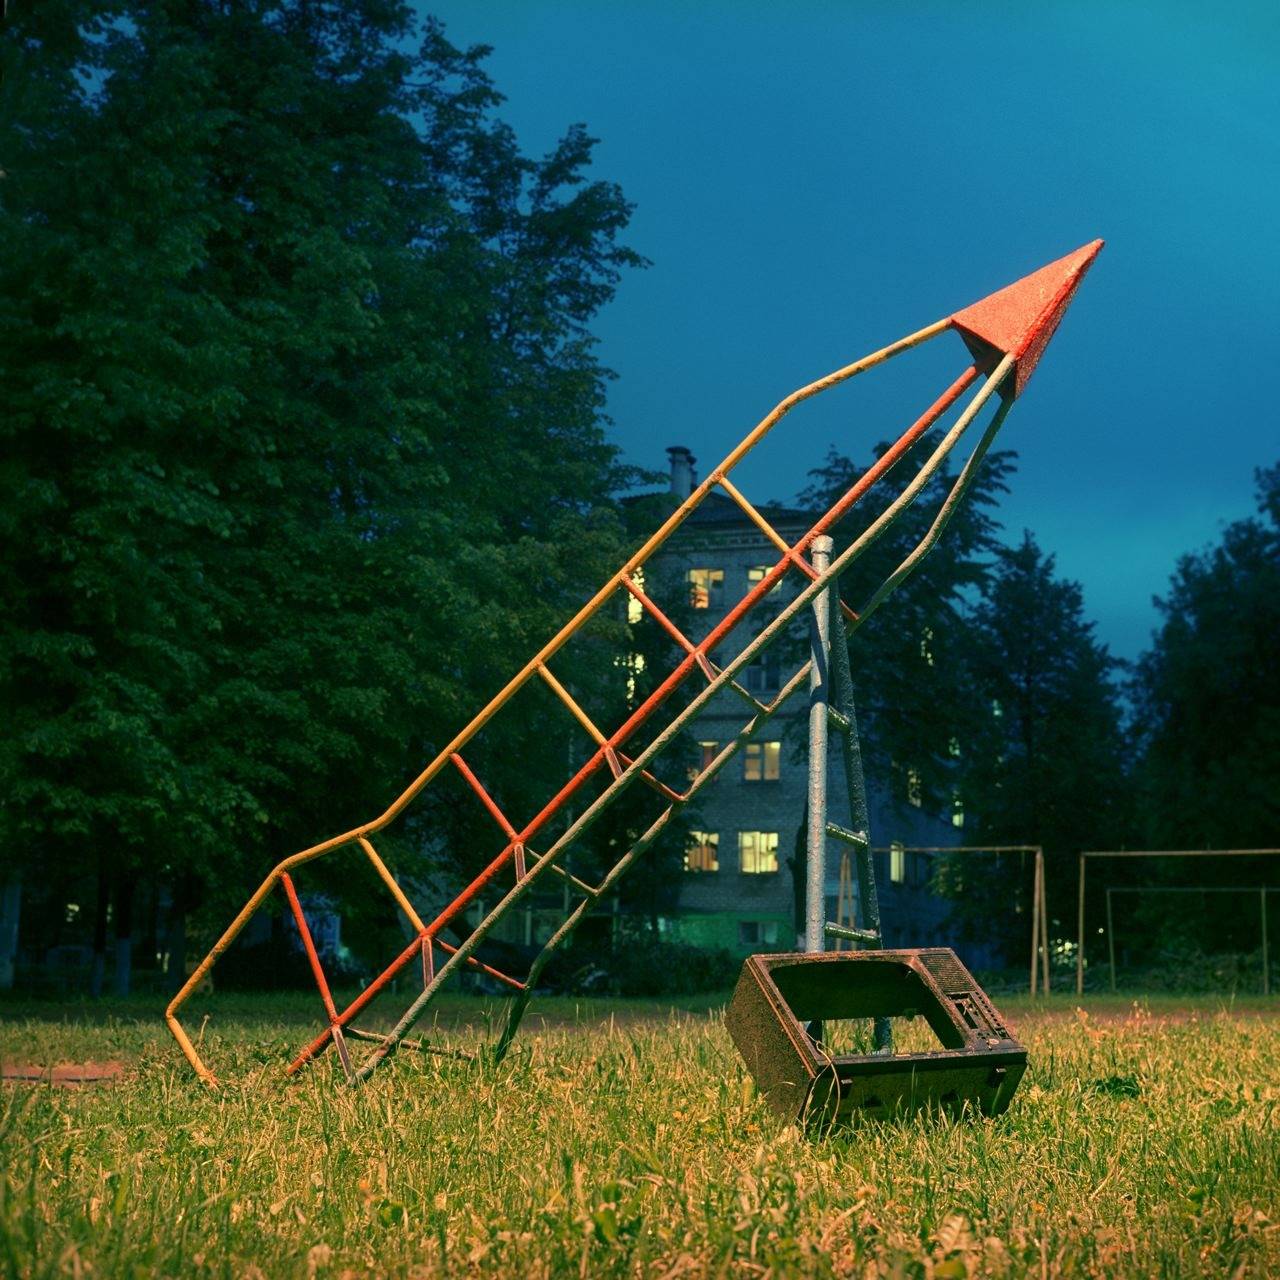 Playground 2009-2010 by Ivan Mikhailov is a 20 x 20 inch archival pigment print, available in an edition of 7. This photograph is signed, titled, dated and numbered on print on print verso.

Playground 2009-2010 features a vibrant scene, with a